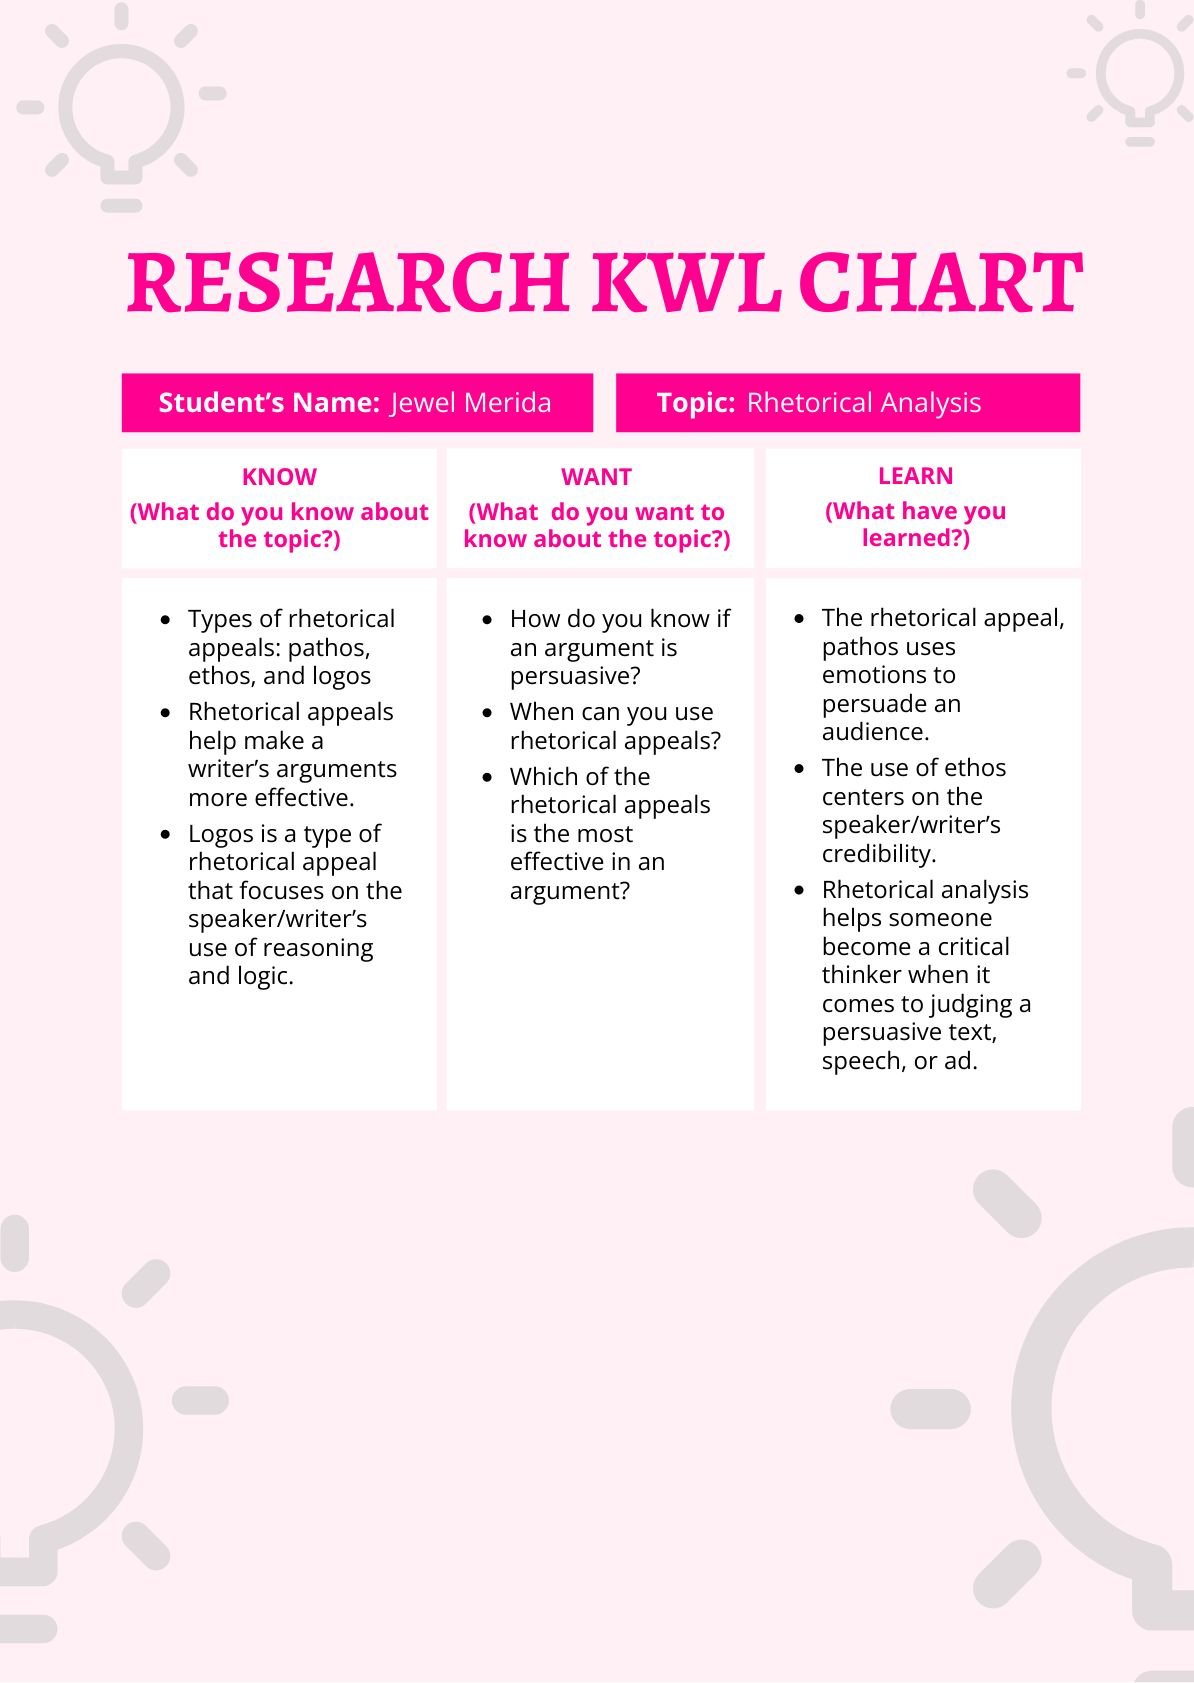 Free Research KWL Chart in PDF